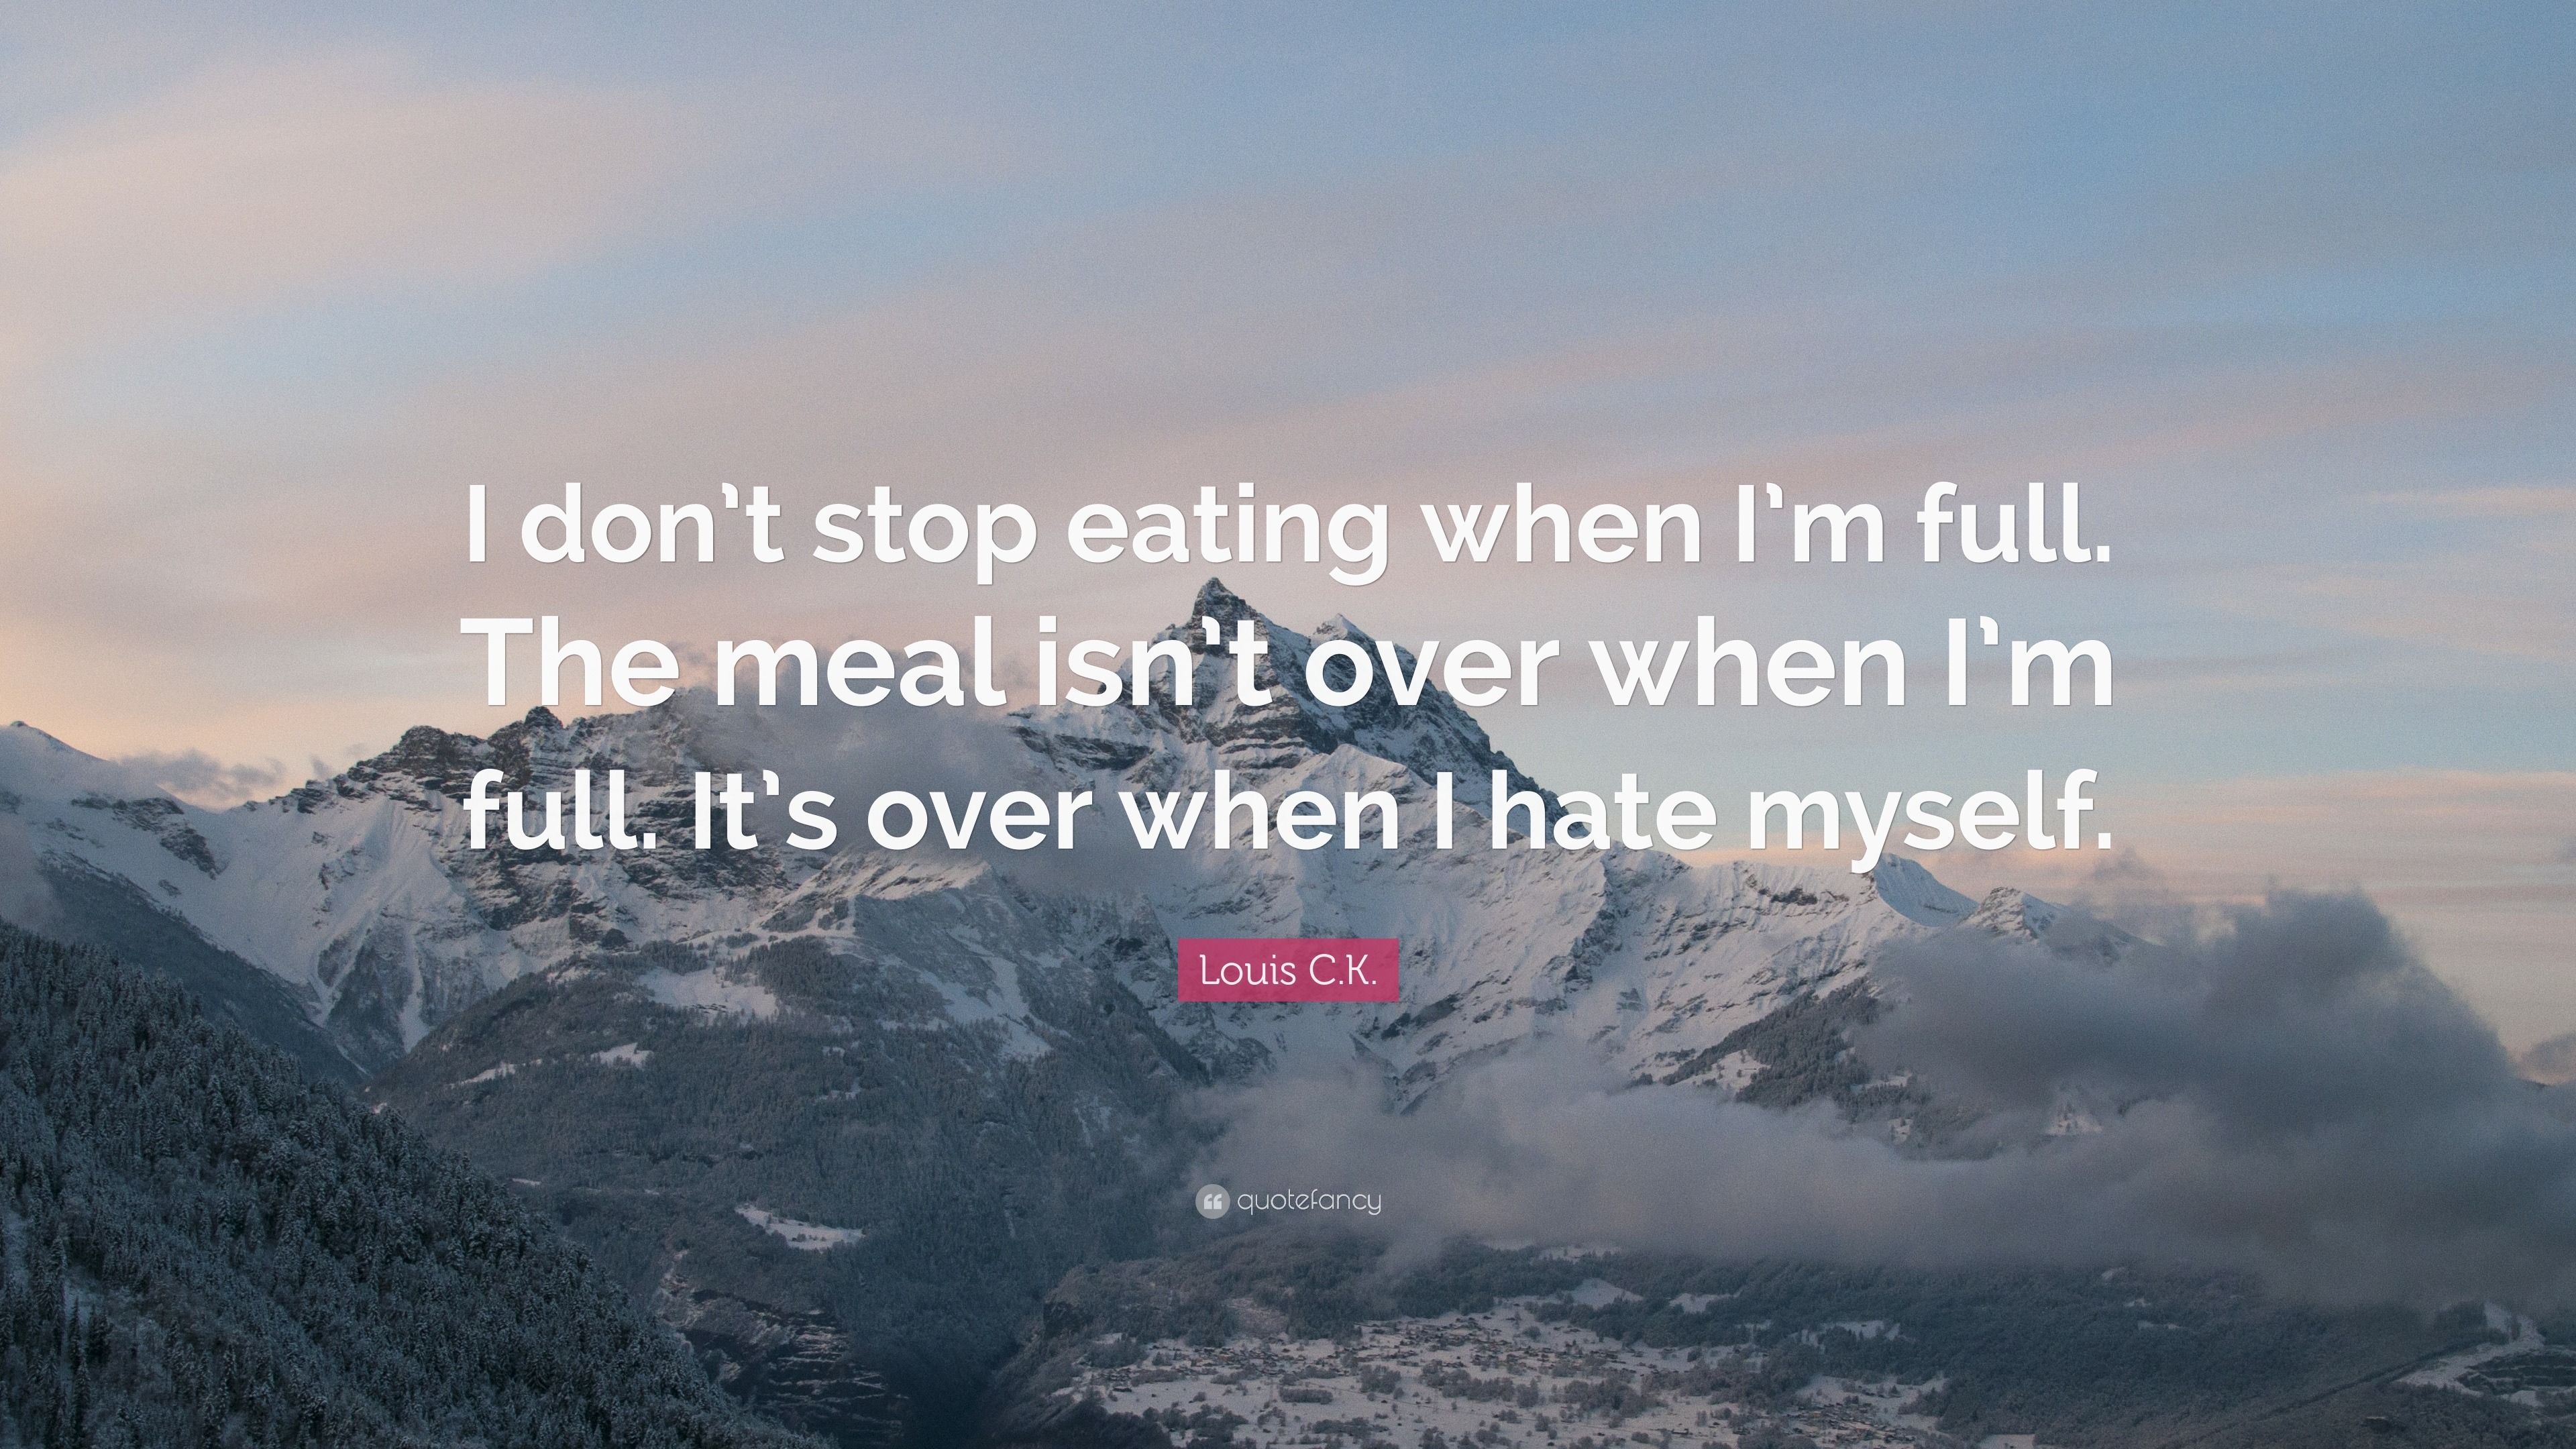 https://quotefancy.com/media/wallpaper/3840x2160/1734128-Louis-C-K-Quote-I-don-t-stop-eating-when-I-m-full-The-meal-isn-t.jpg